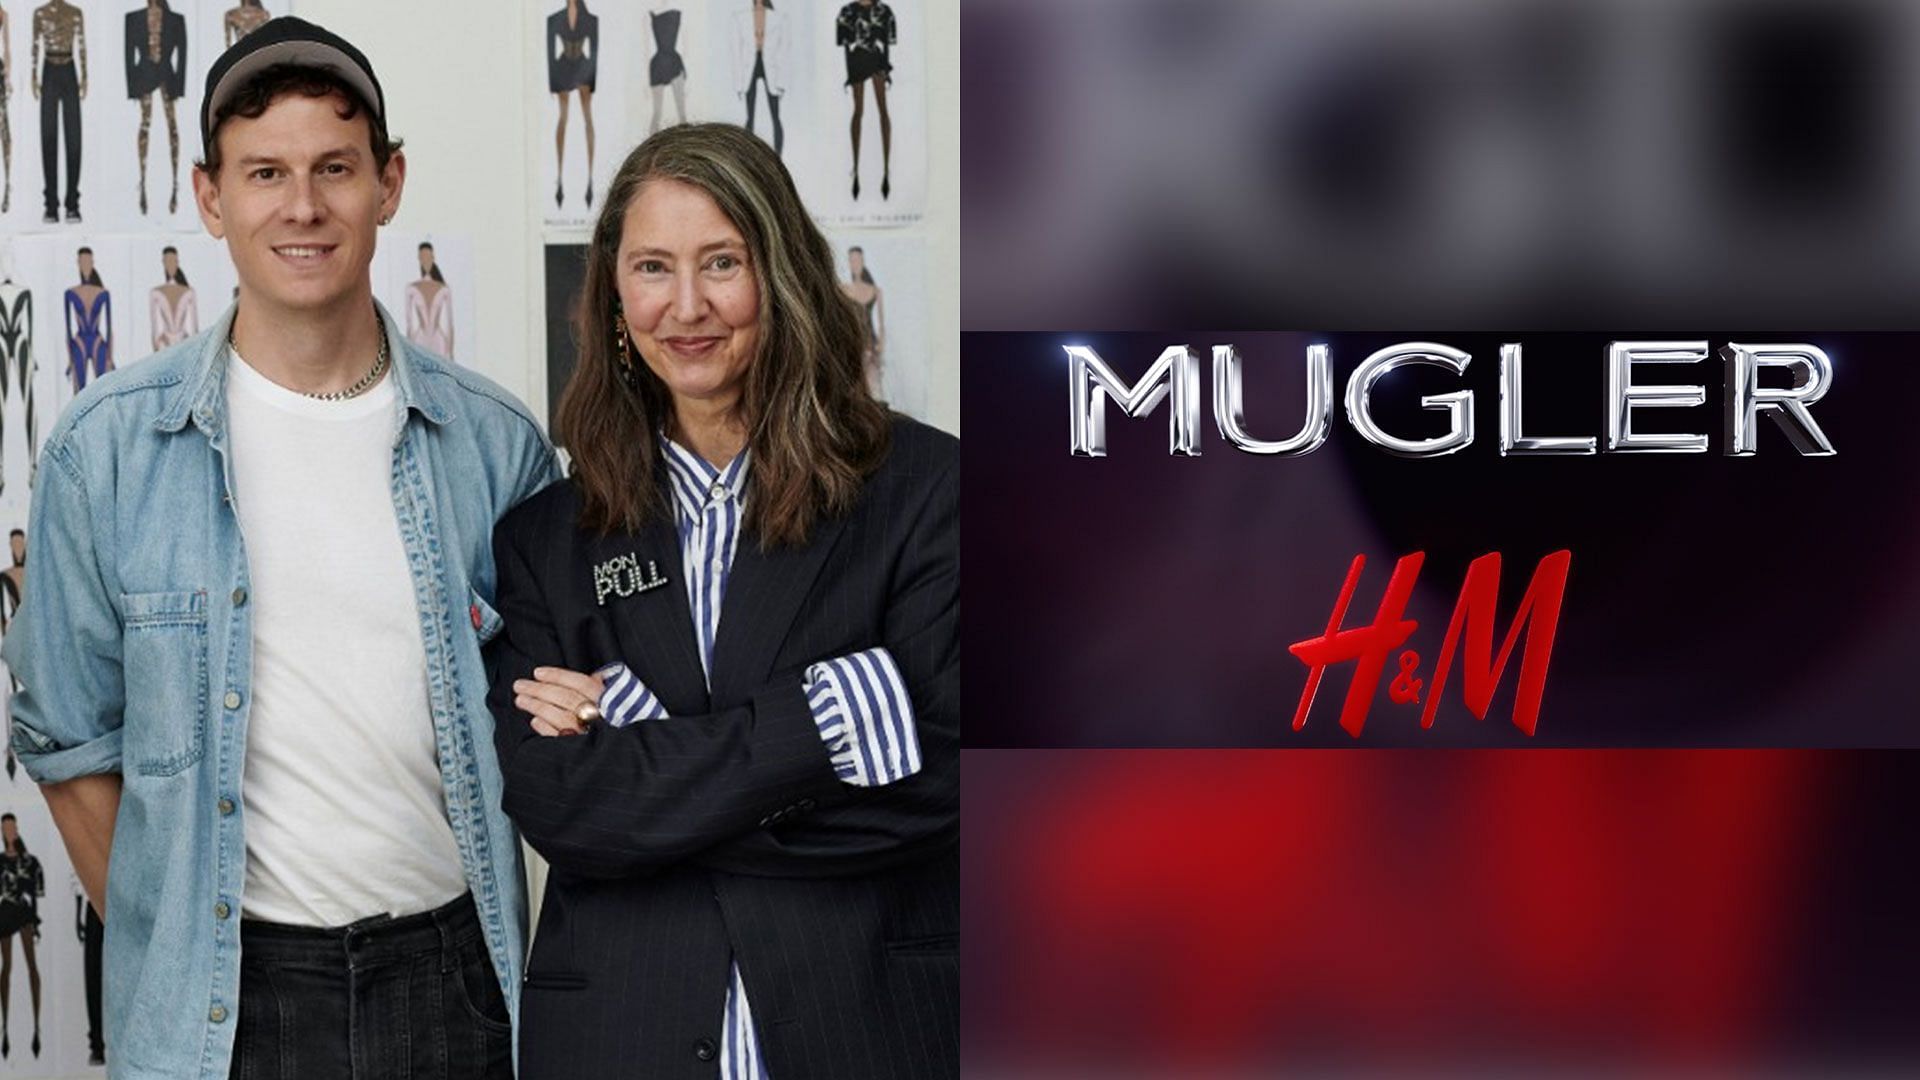 Mugler H&M is coming. A major new designer collaboration, launching May  2023.